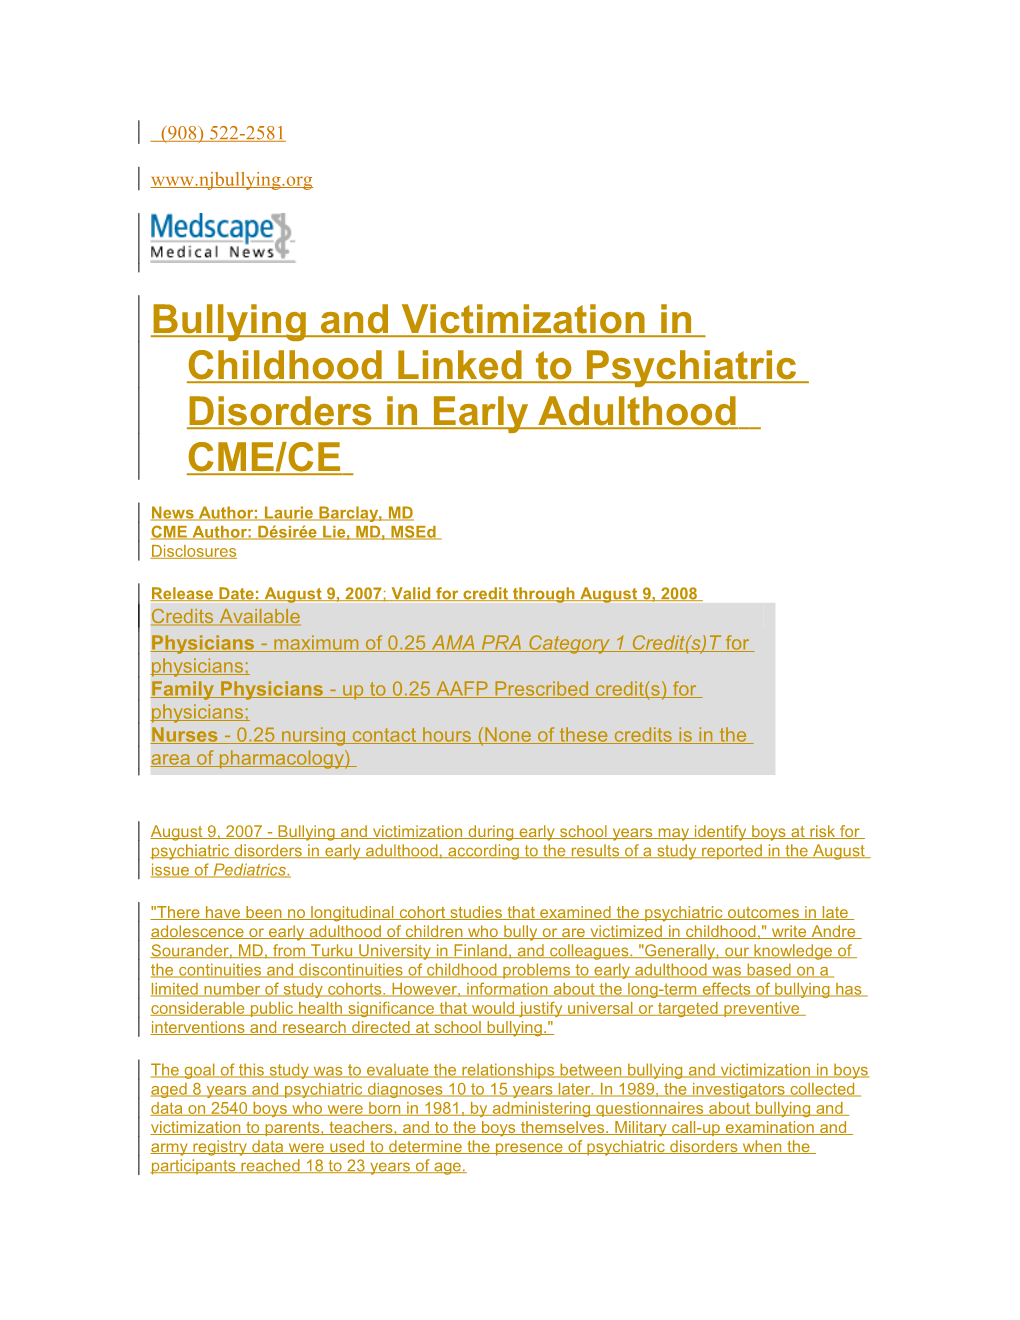 Bullying and Victimization in Childhood Linked to Psychiatric Disorders in Early Adulthood